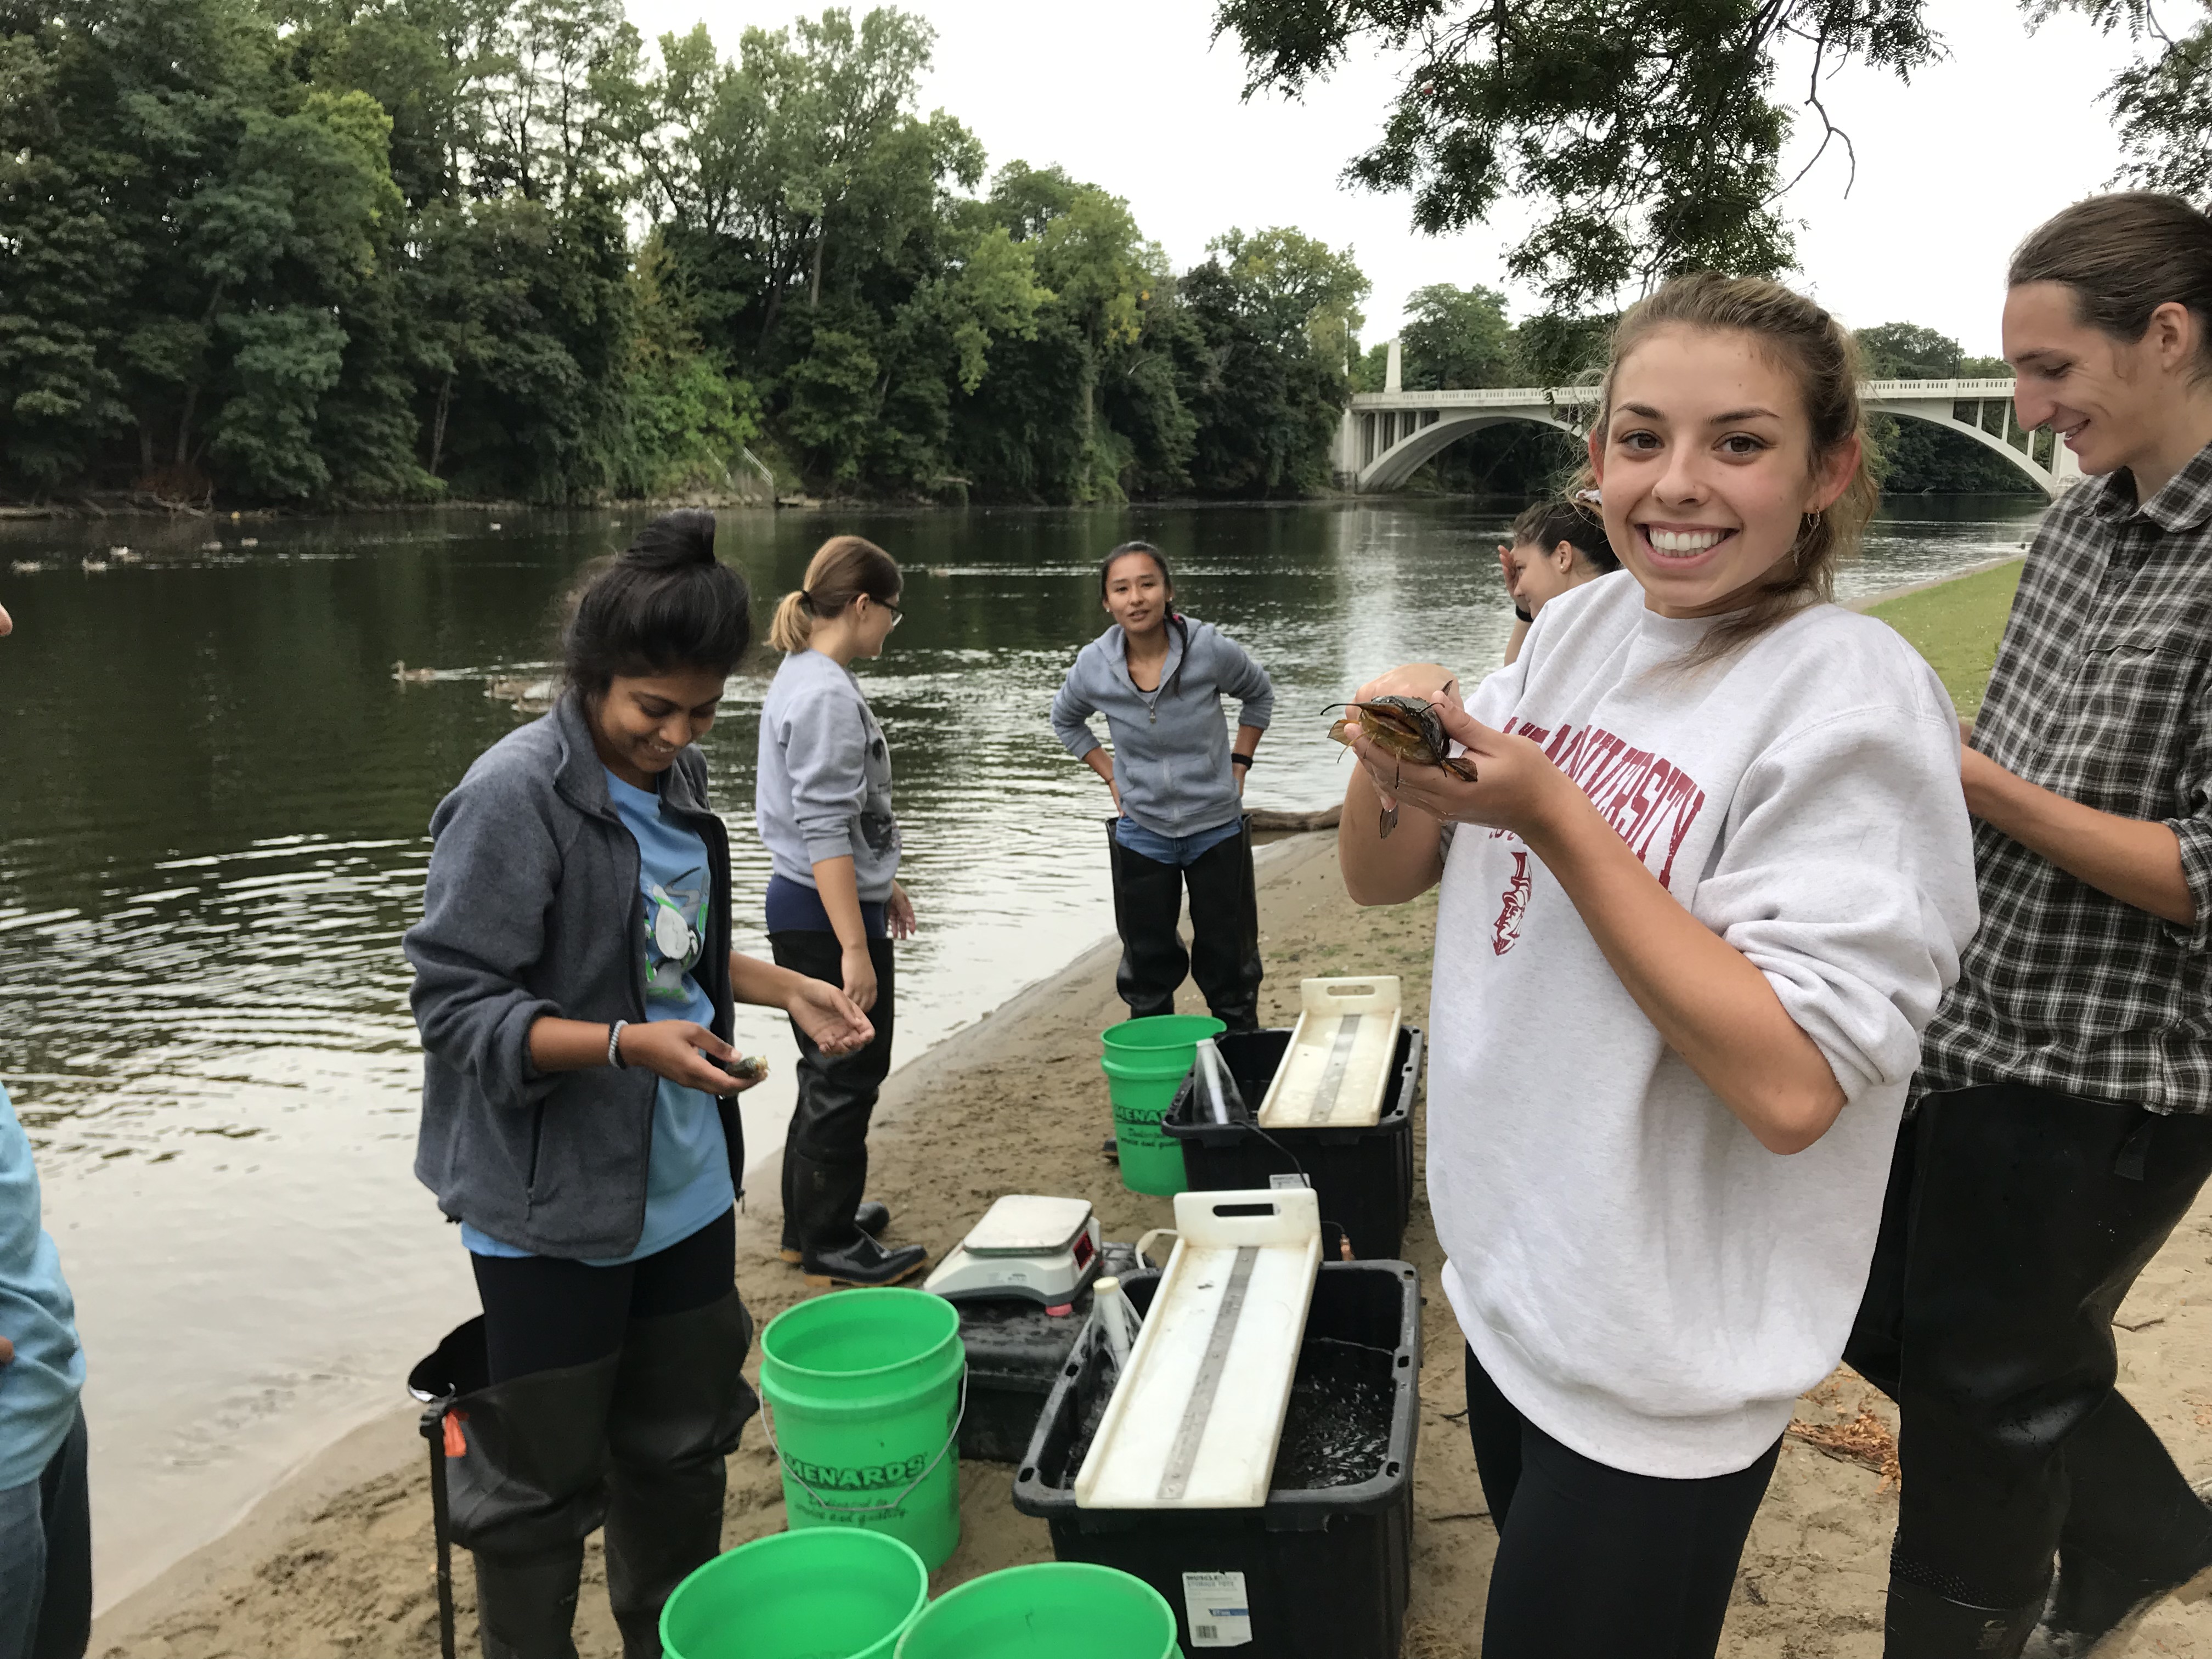 Girl holding catfish and smiling on riverbank with other Field and Laboratory Ecology students